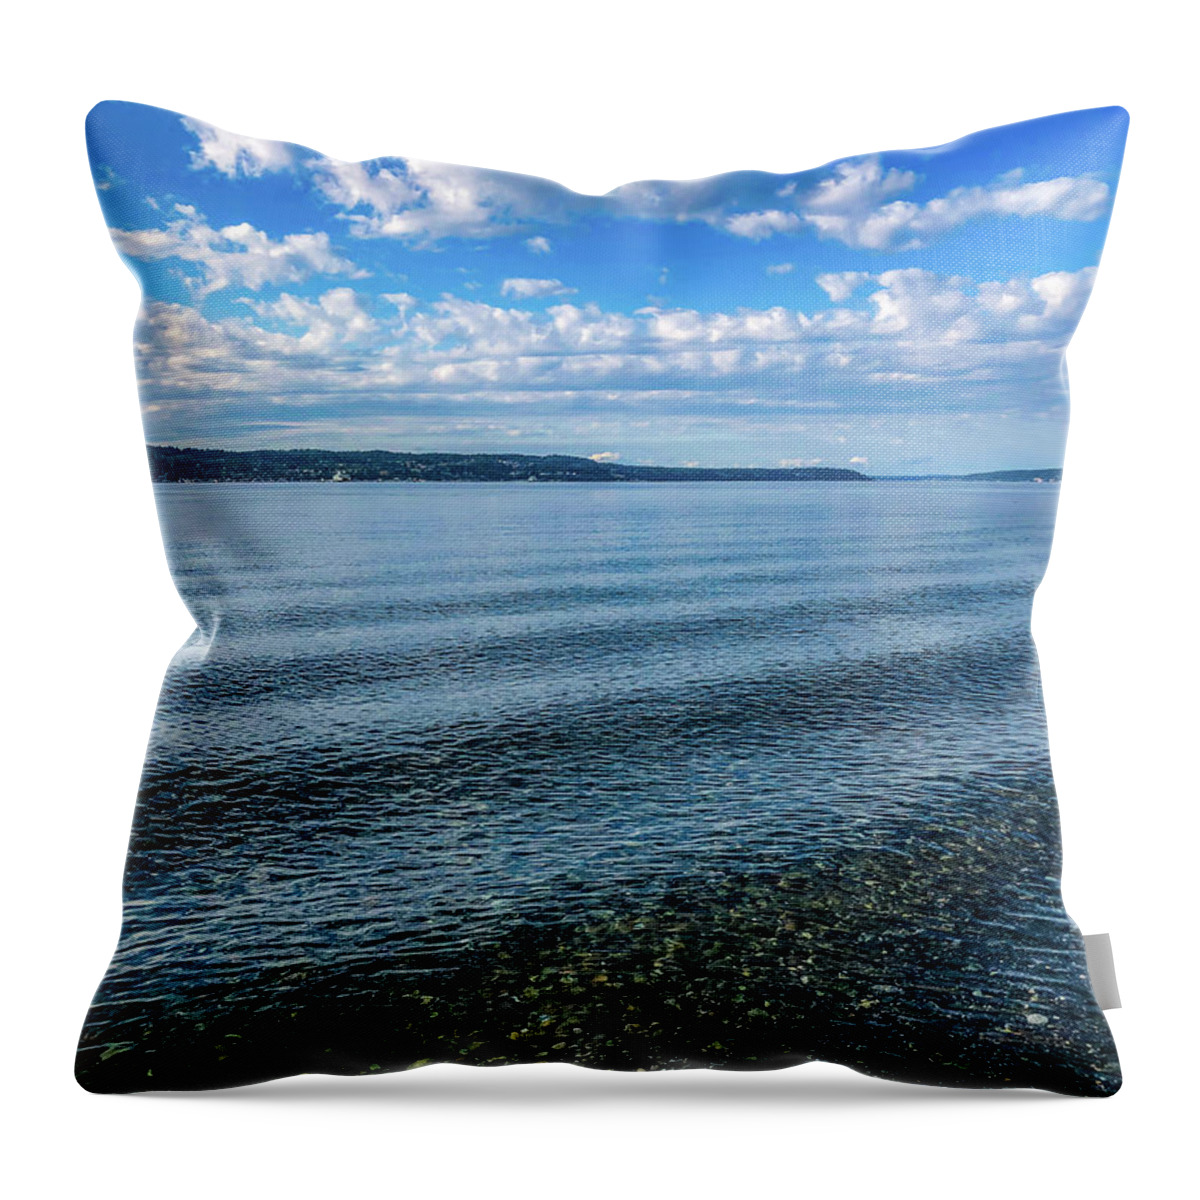 Seashore Throw Pillow featuring the photograph Seashore by Anamar Pictures